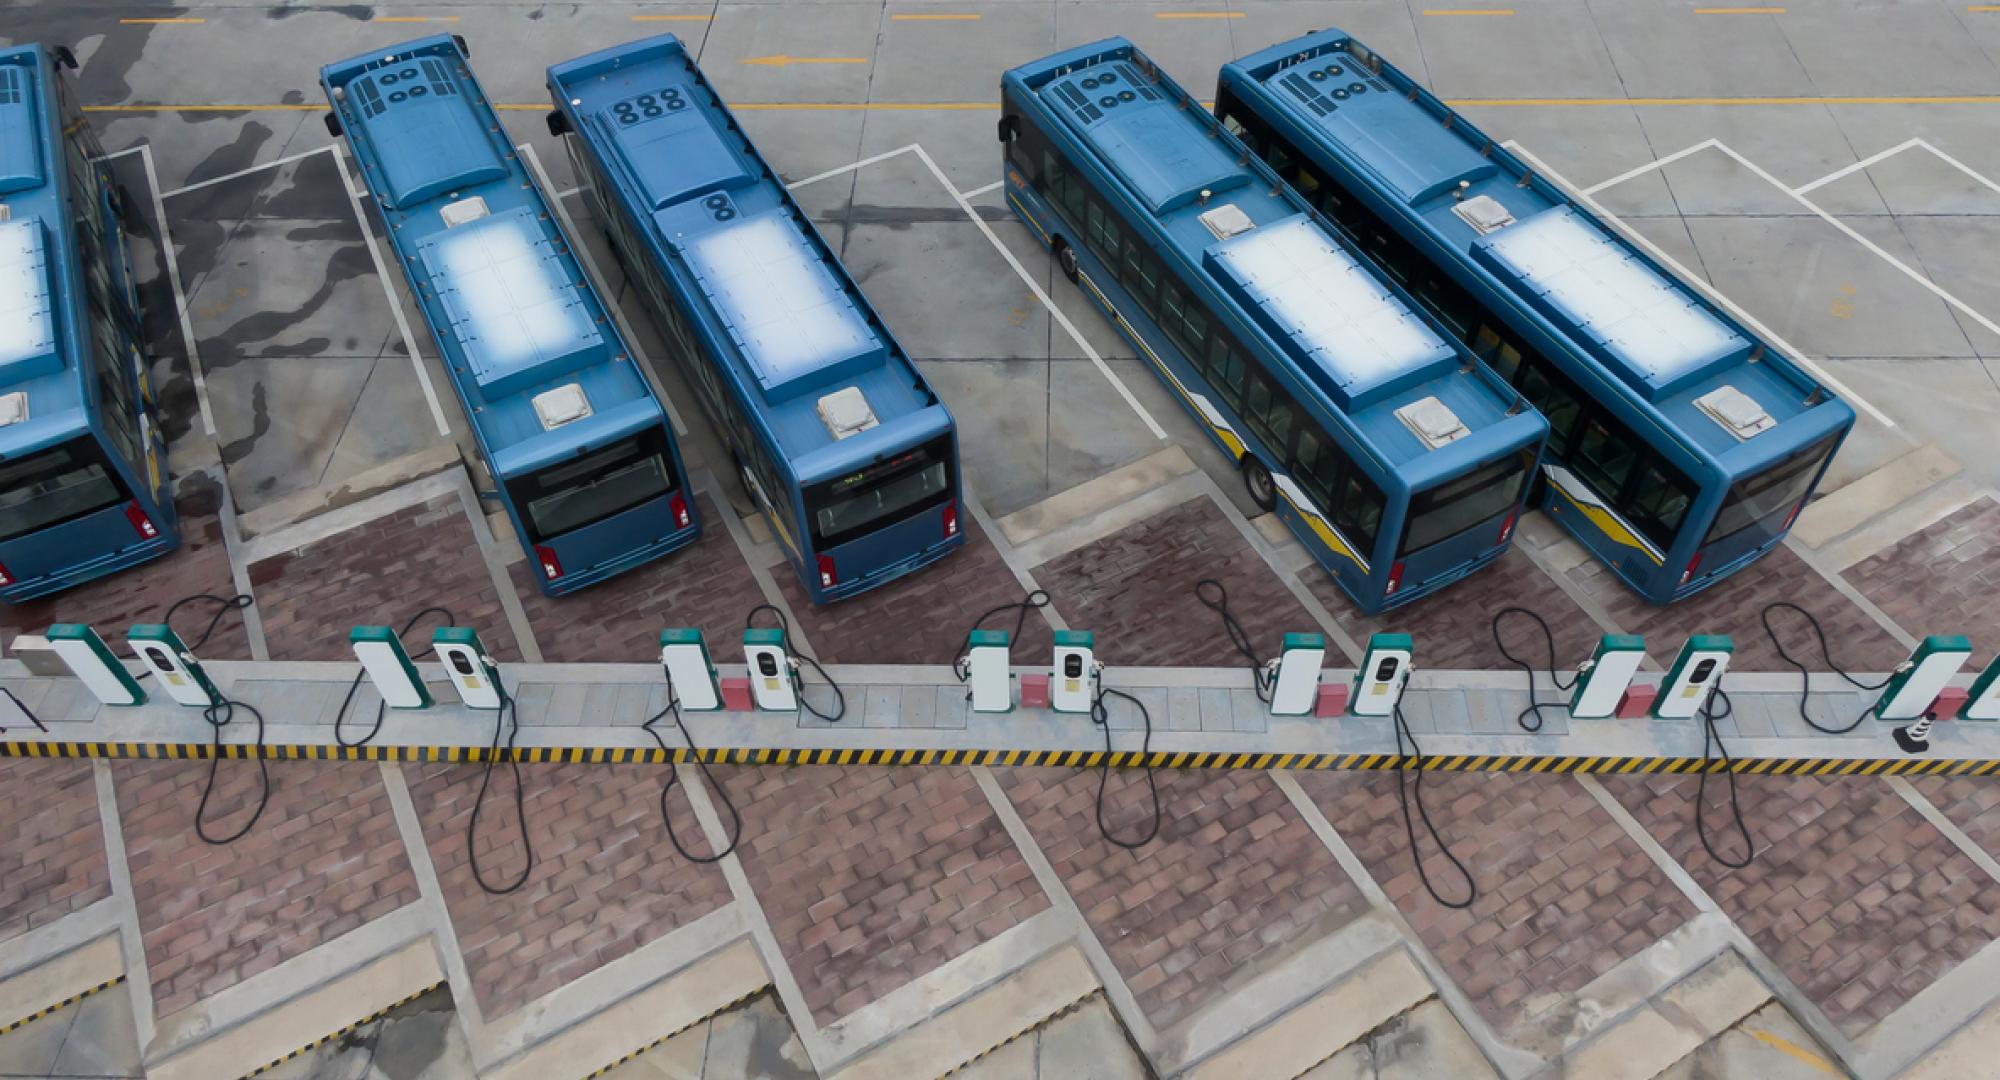 New electric bus charging station